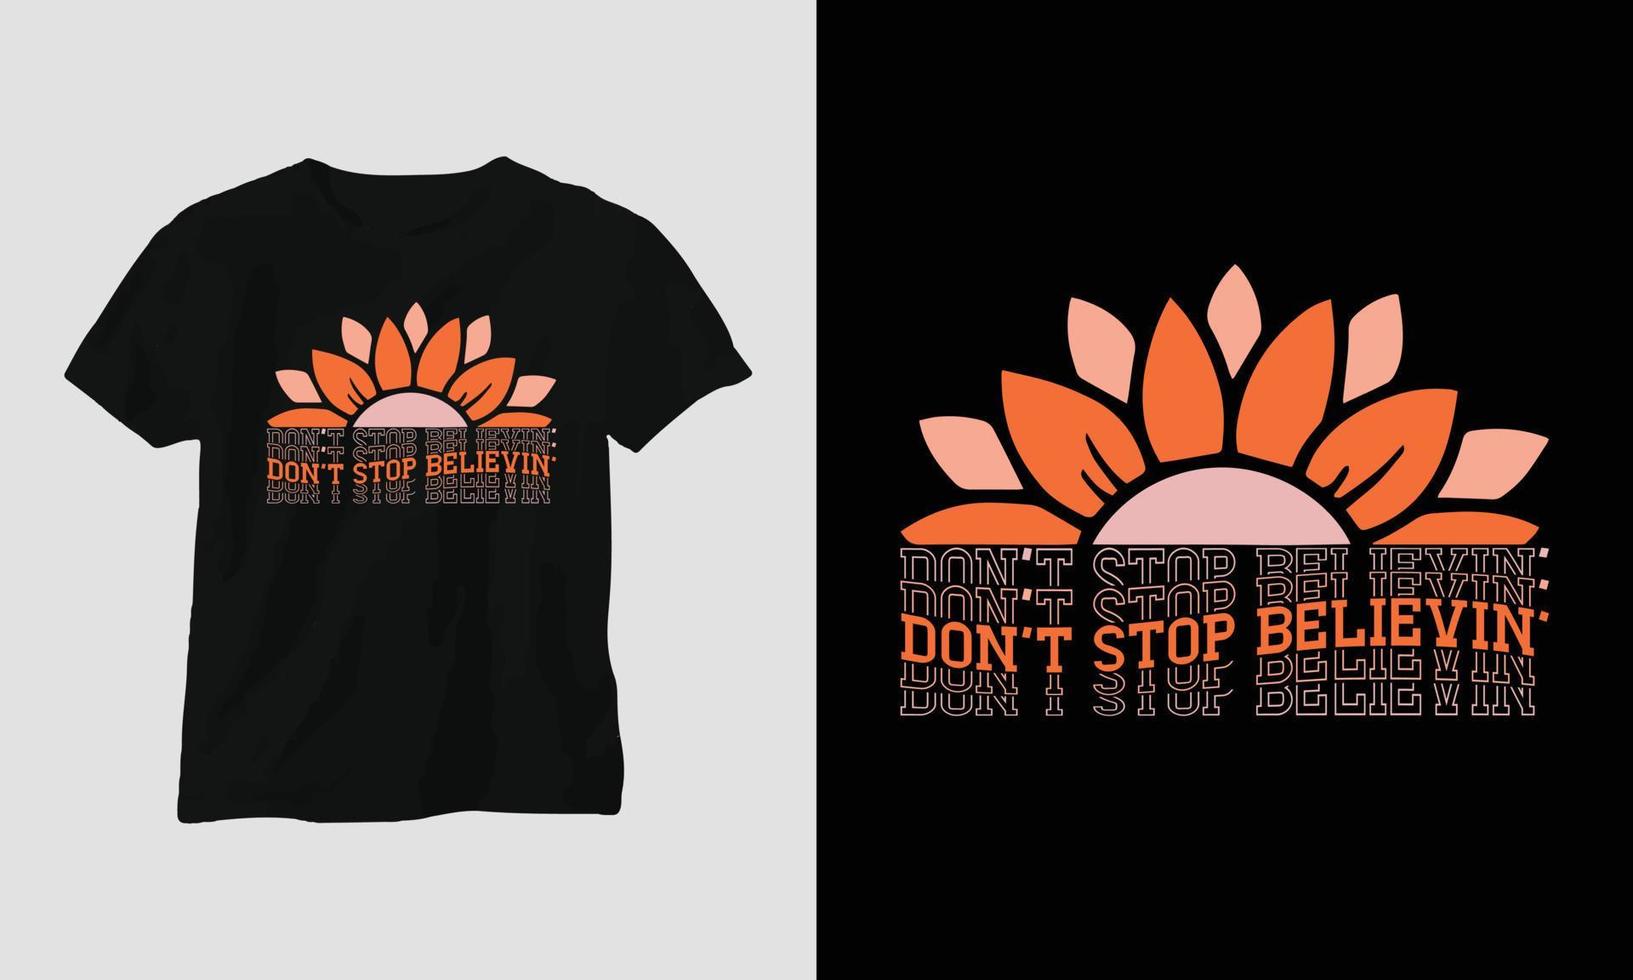 dont stop believin - Christmas Retro Groovy t-shirt and apparel design. vector